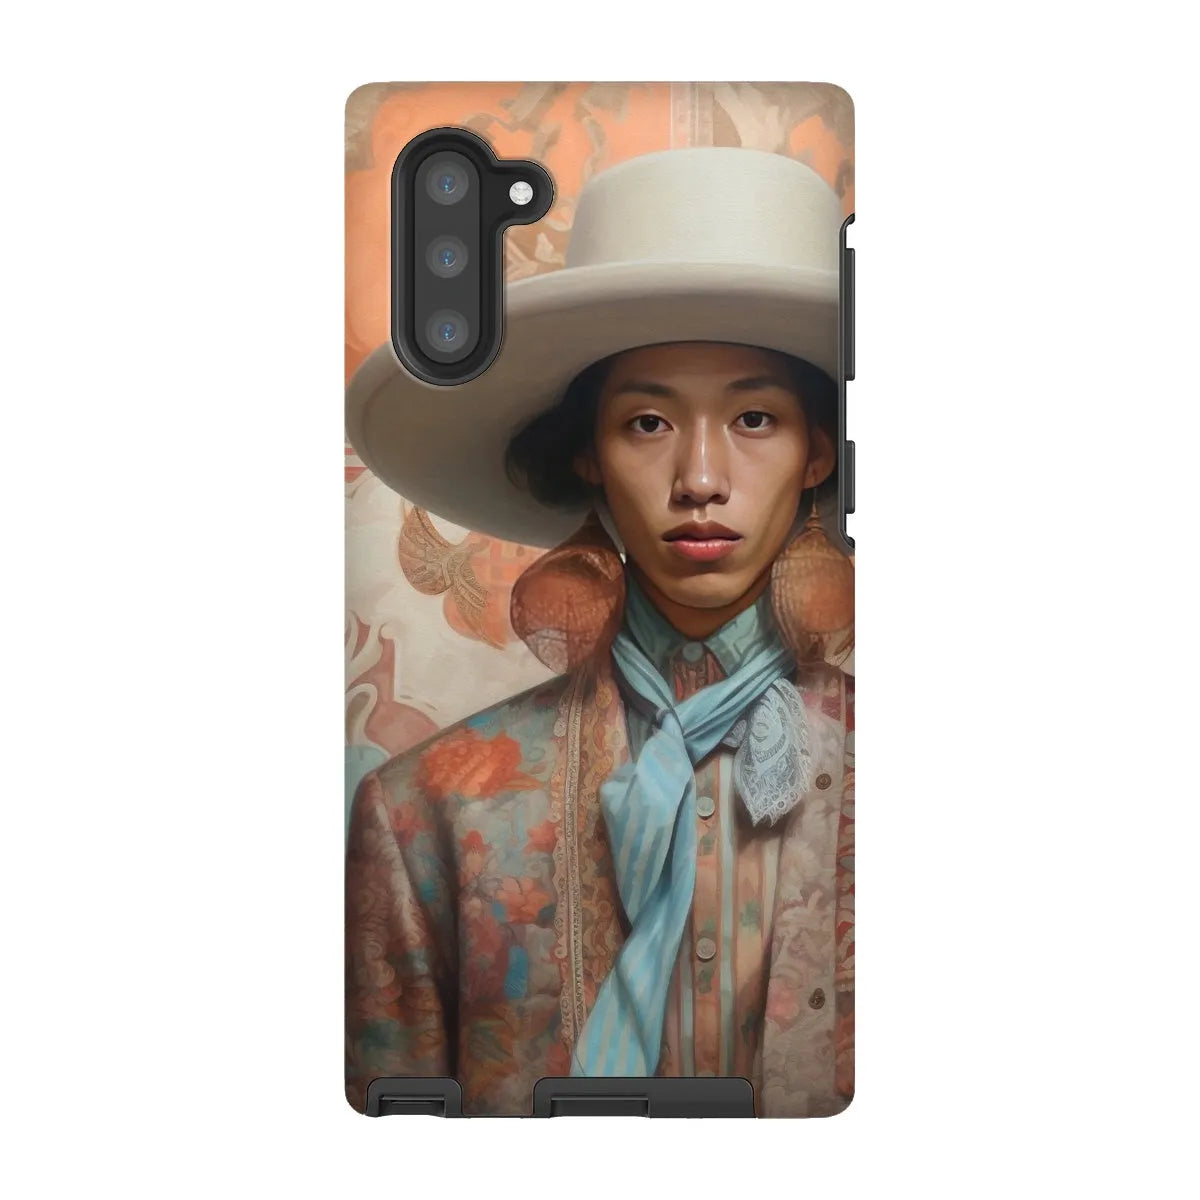 Iyaan - Gay Malay Asian Cowboy Aesthetic Art Phone Case - Samsung Galaxy Note 10 / Matte - Mobile Phone Cases